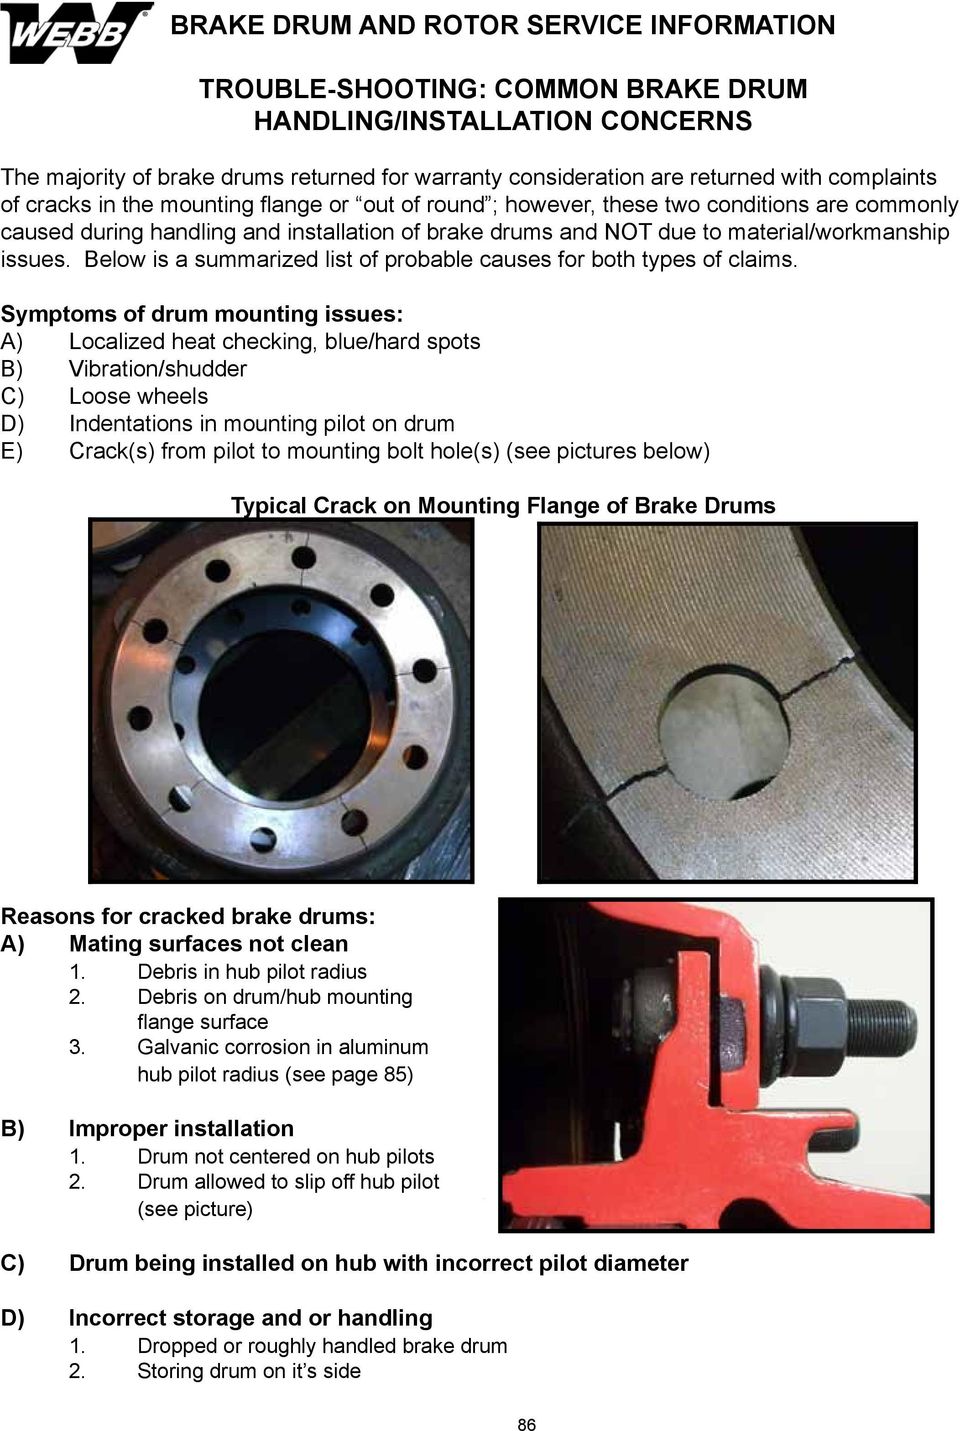 consideration are returned with are commonly caused during handling and installation of brake drums and NOT due to The majority complaints of brake of cracks drums in returned the mounting for